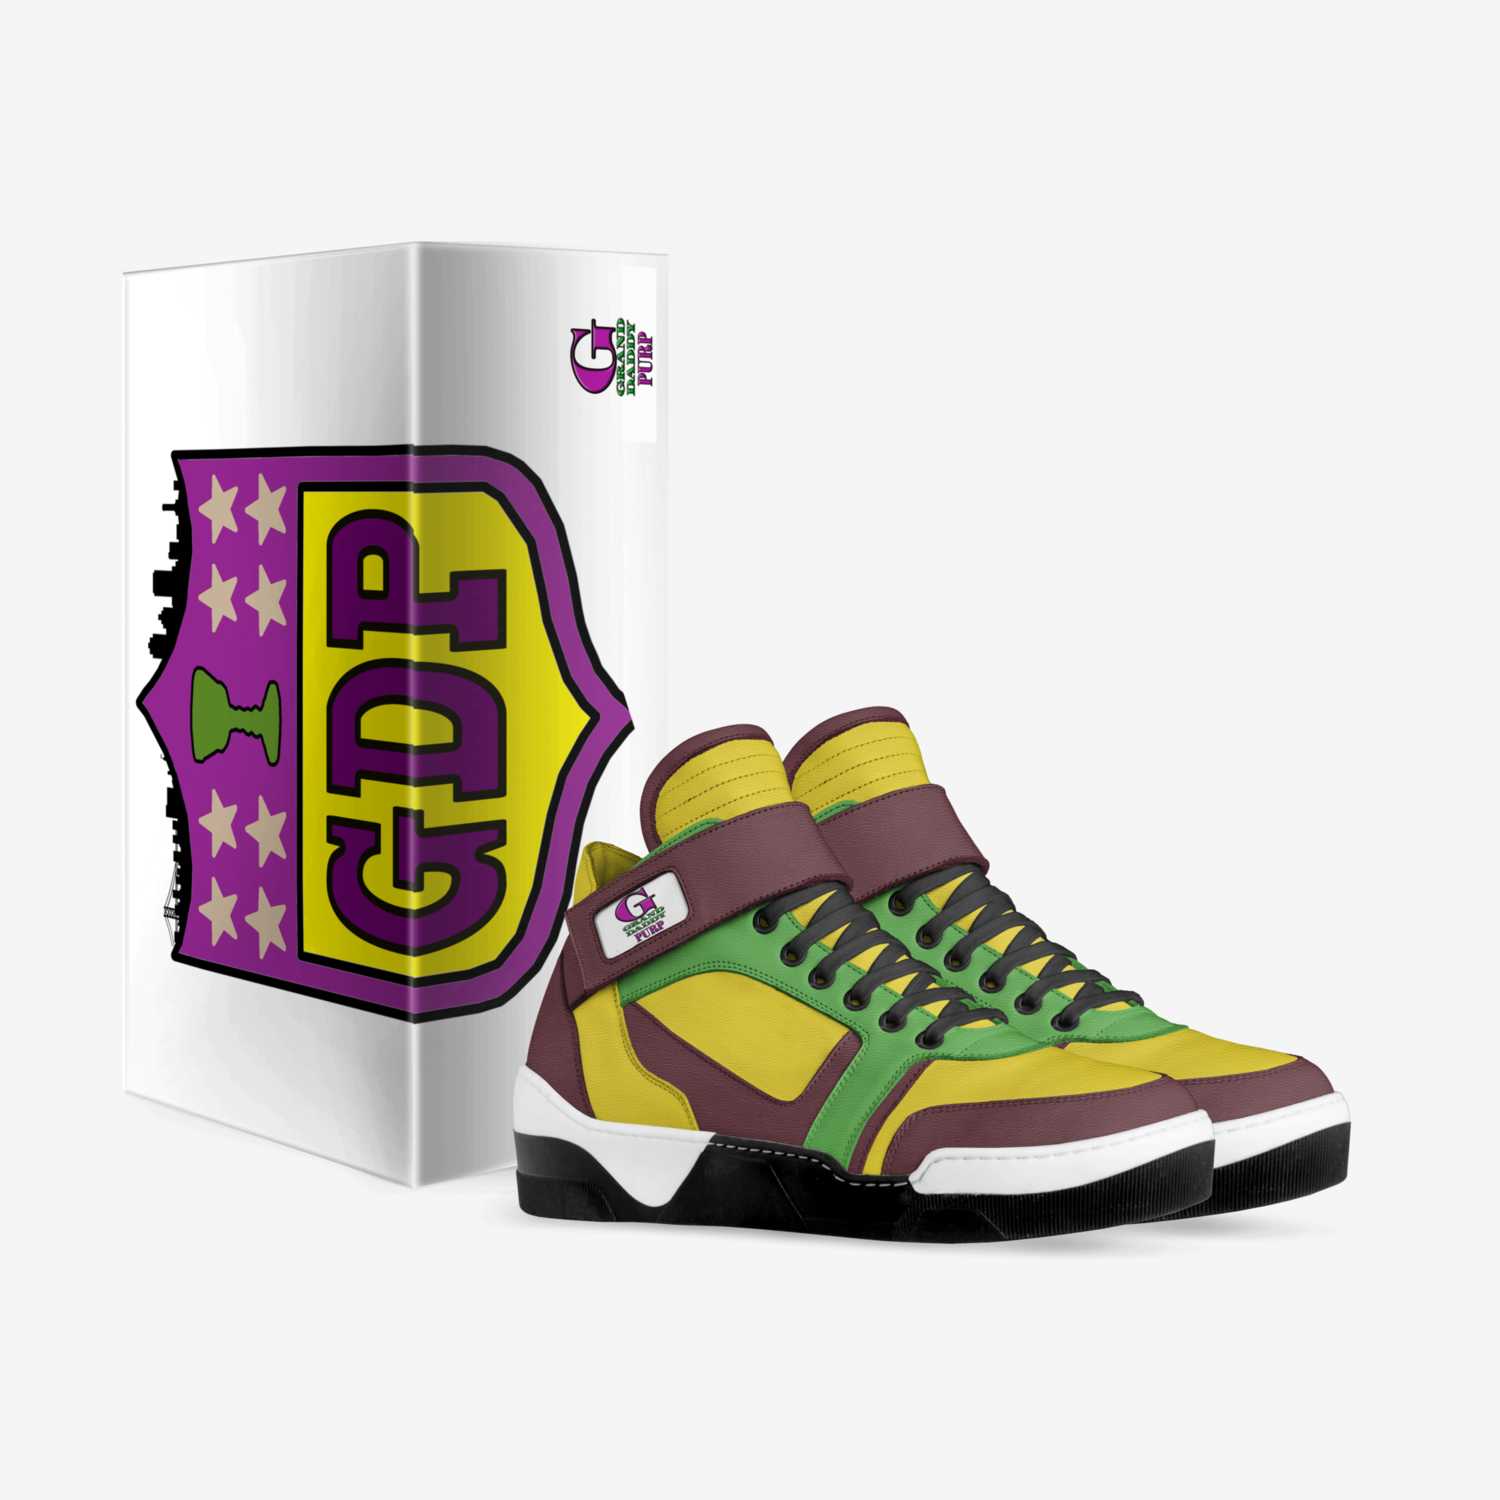 GRANDADDY PURPS custom made in Italy shoes by Joel Morales | Box view